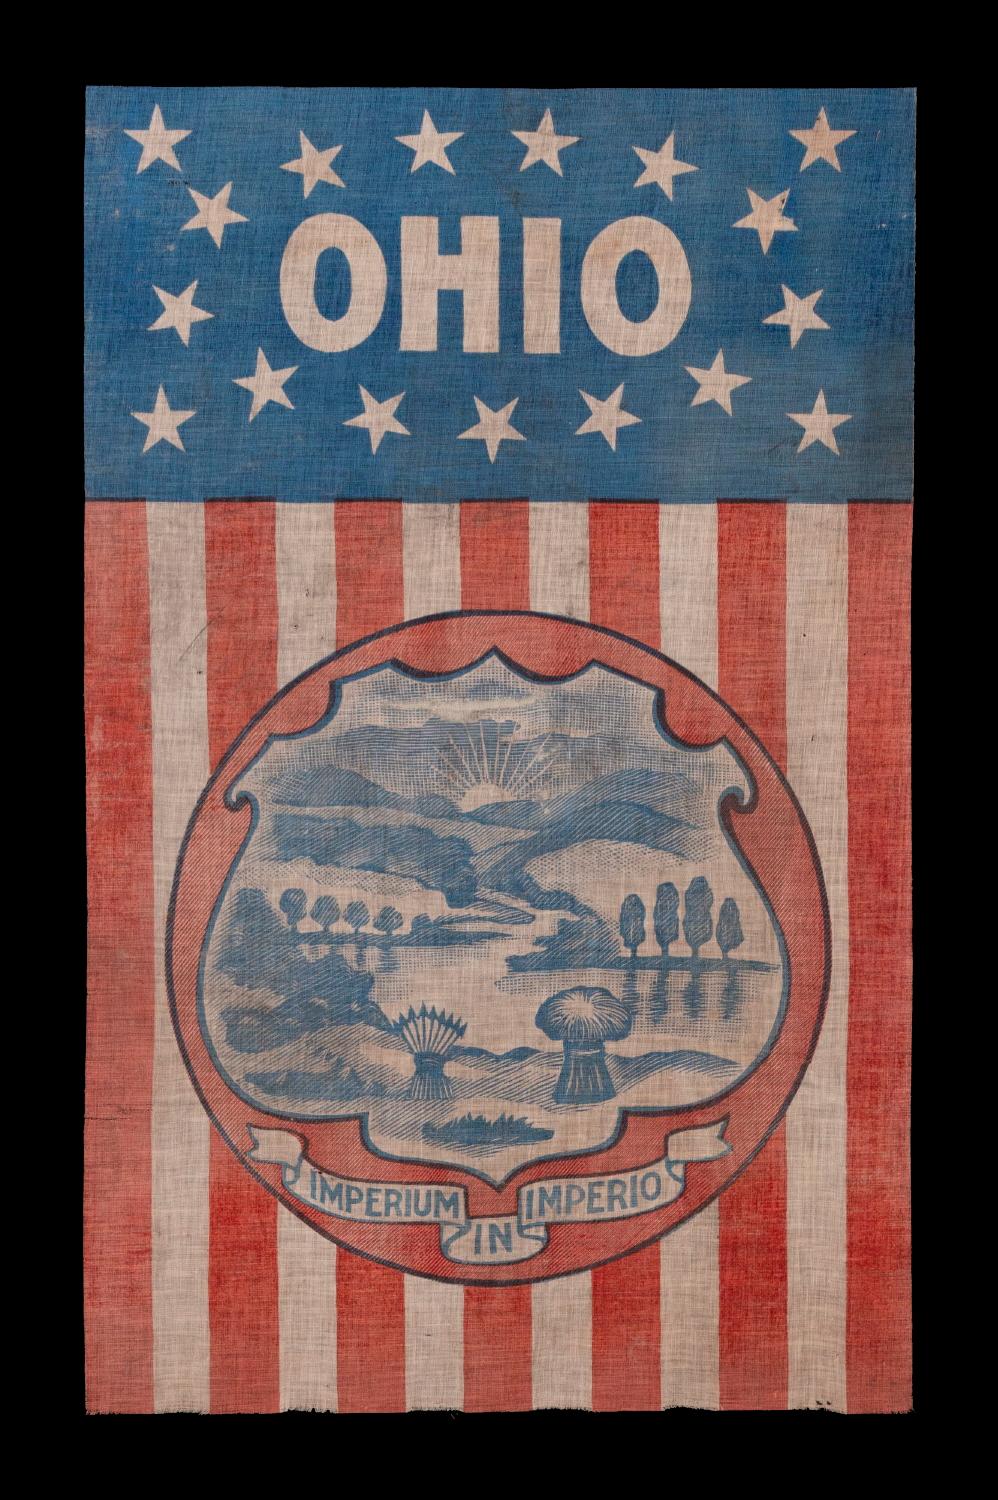 Rare and unusual parade flag banner with 17 stars on a blue ground and the 1866 version of the Ohio state seal on a ground of 13 red and white stripes, made ca 1890 -1905

Printed on coarse cotton, in the manner of a parade flag, this rare